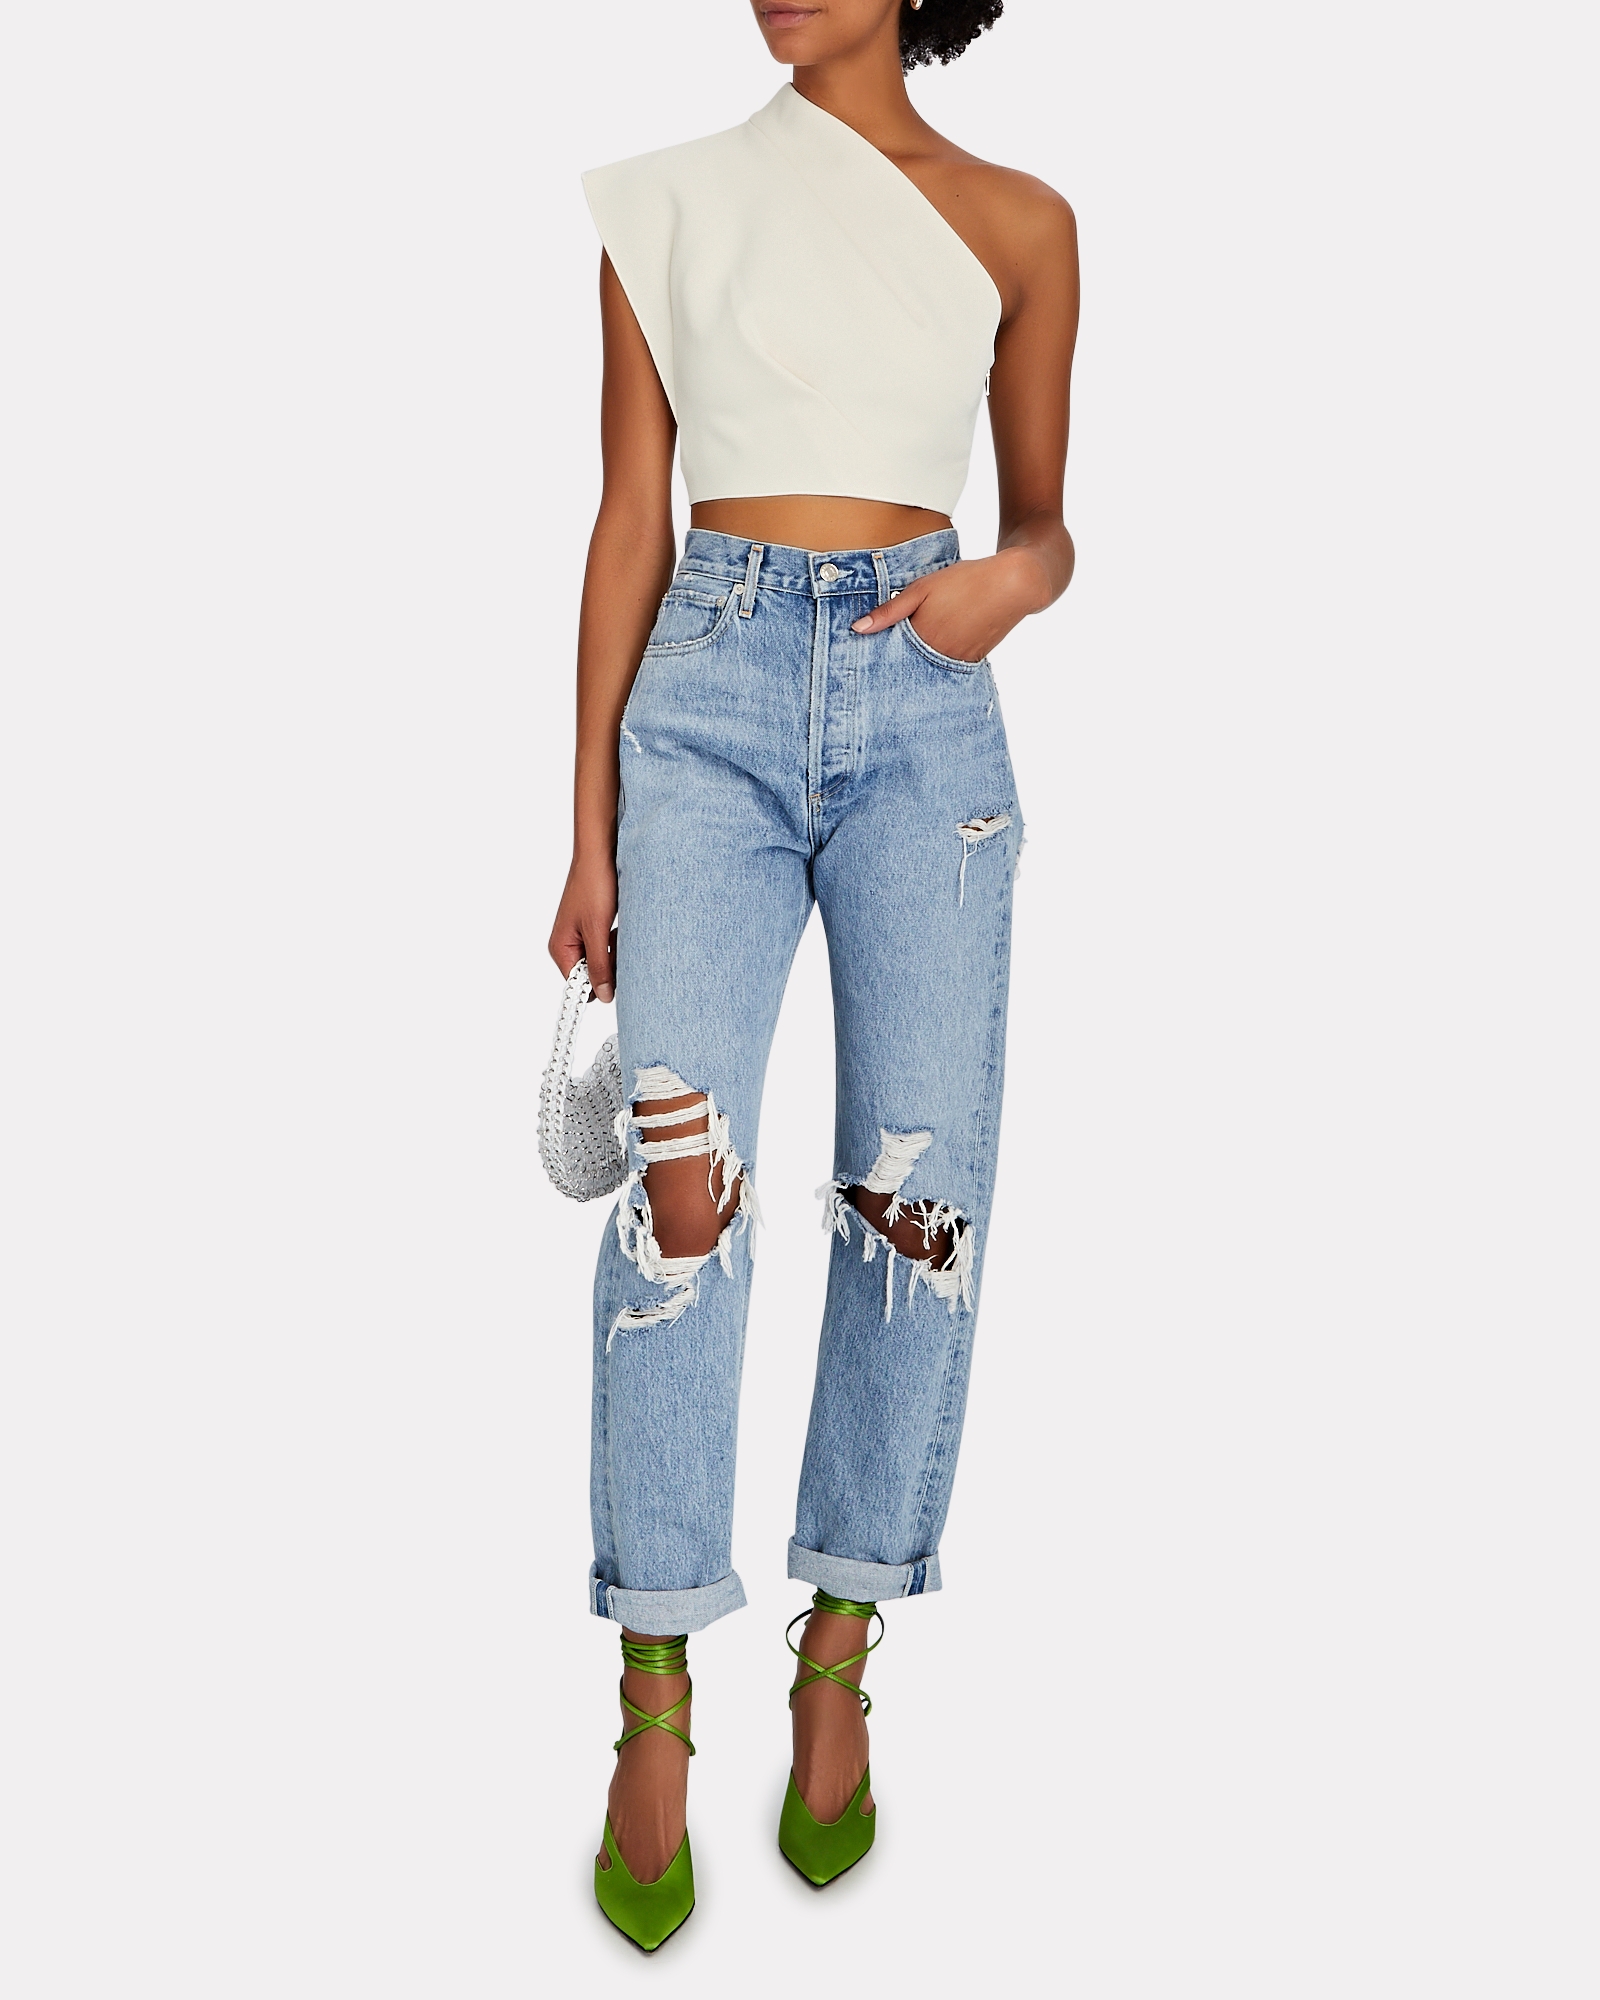 Acler Anderson Cropped One-Shoulder Top | INTERMIX®